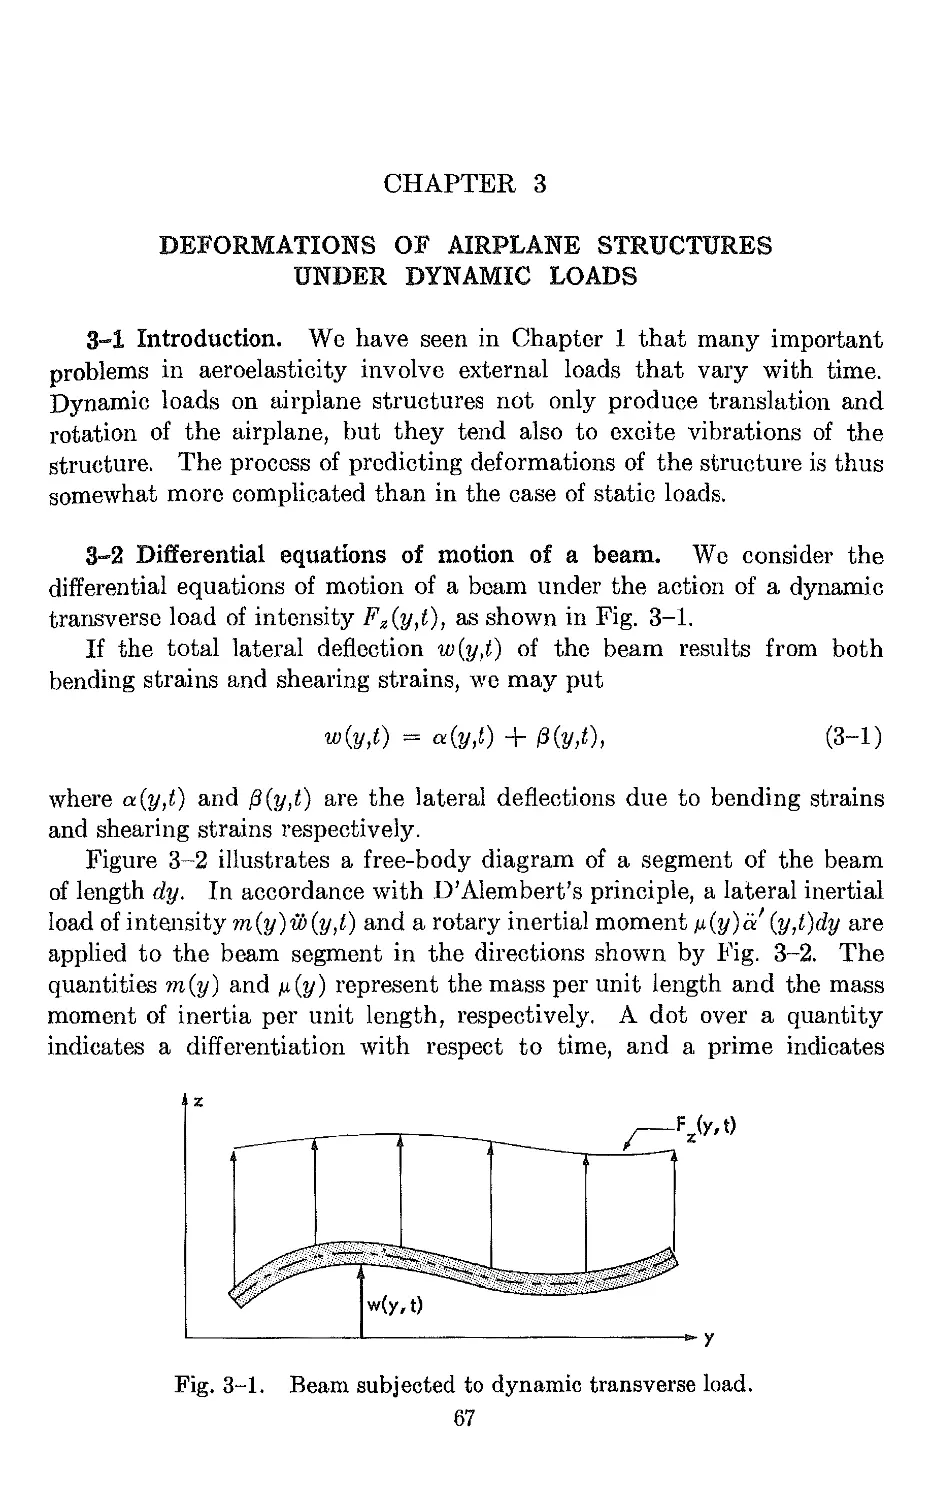 Chapter 3. Deformations of Airplane Structures Under Dynamic Loads
3.2 Differential equations of motion of a beam